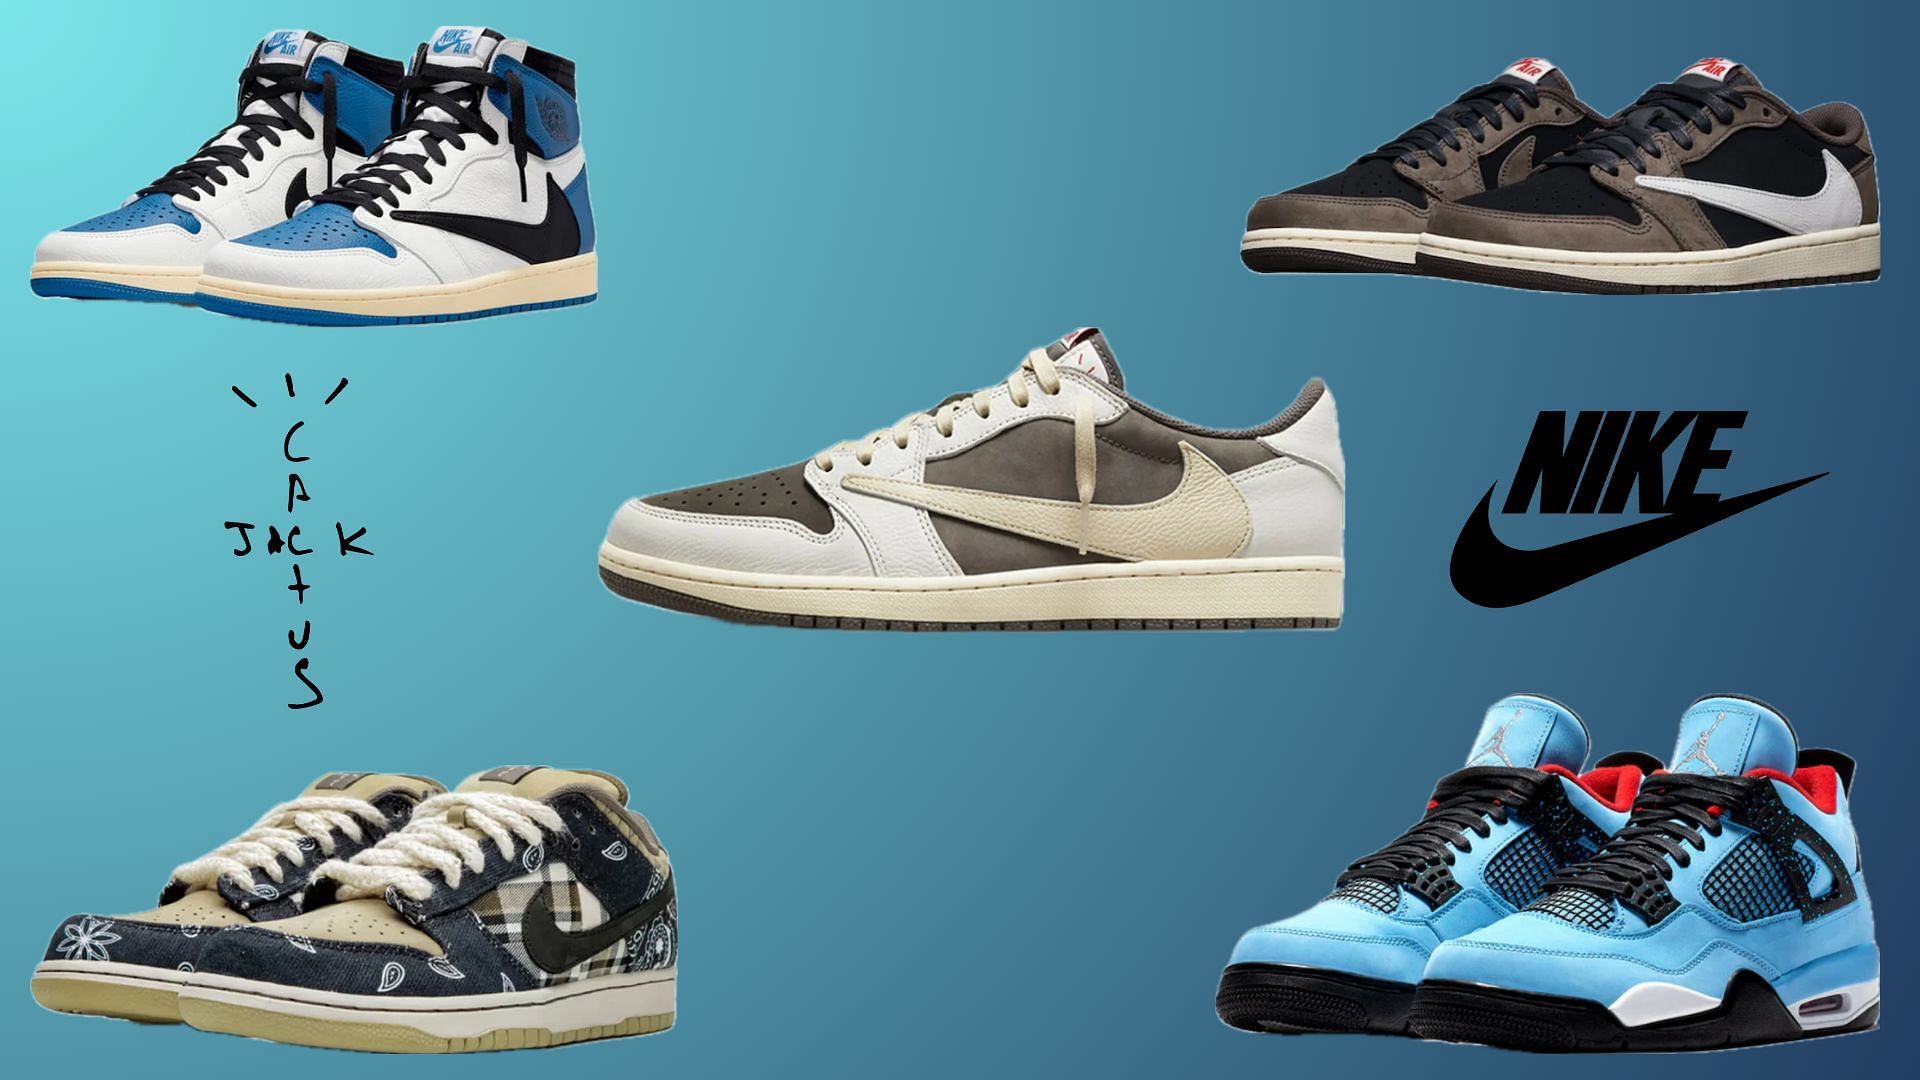 Travis Scott x Nike sneakers sold for high resale prices (Image via Nike)